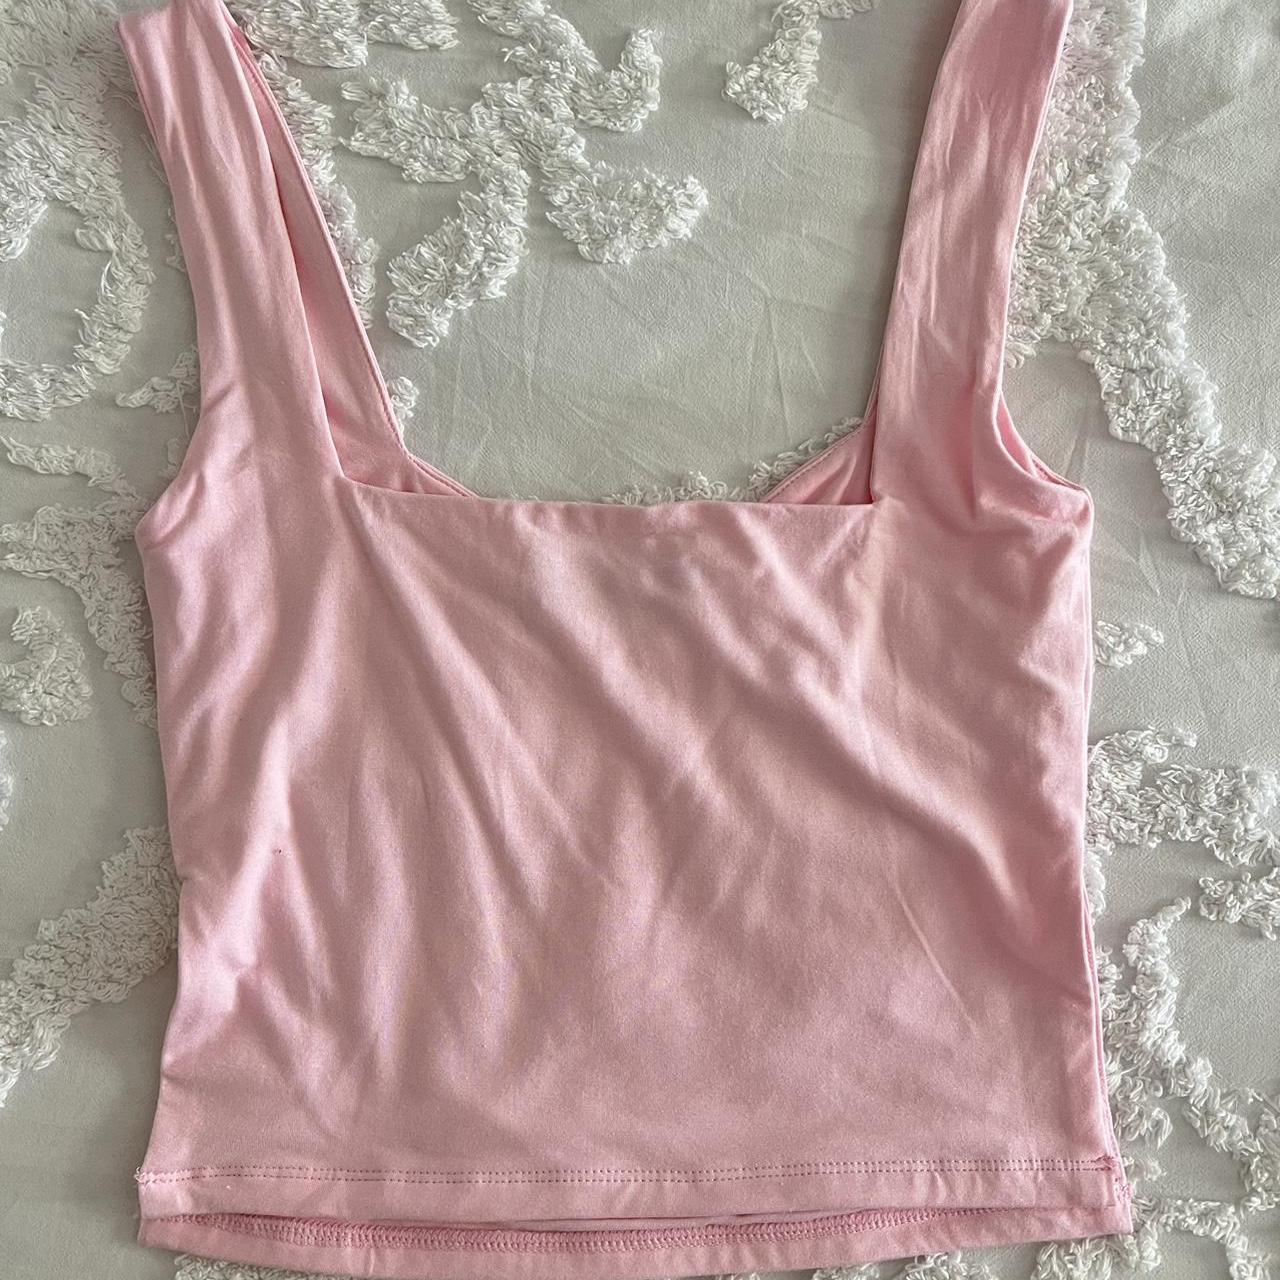 White fox Taking Off Top in the color baby pink - Depop